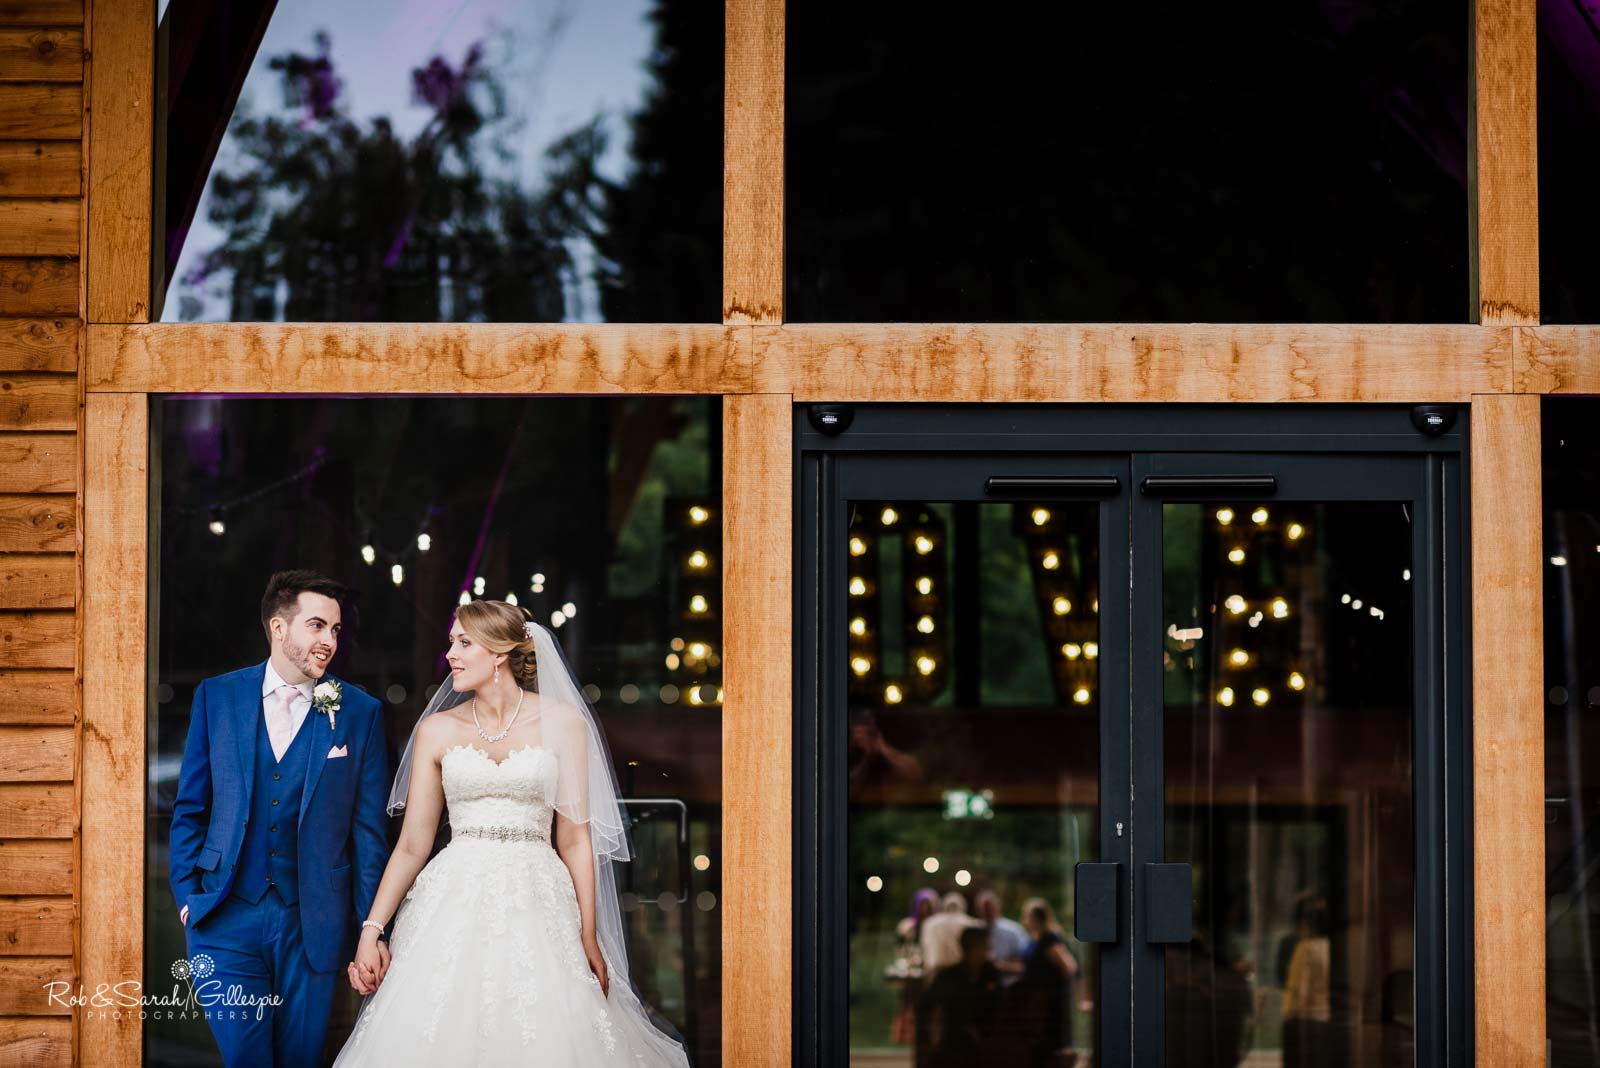 Relaxed and natural couple portraits at The Mill Barns wedding venue